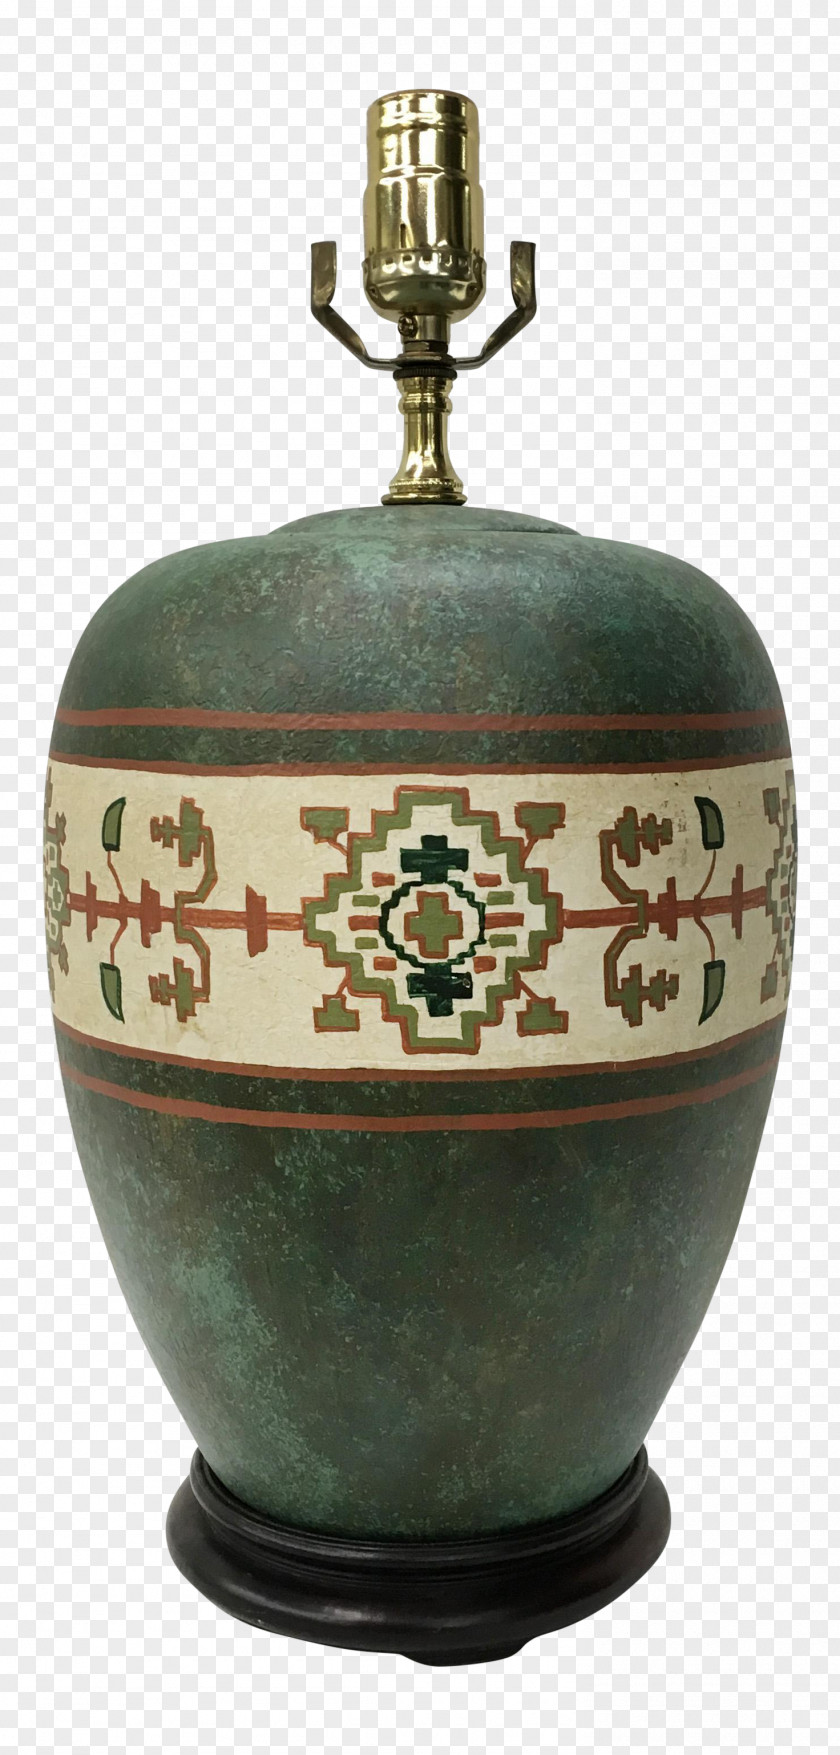 Hand Painted Lamp Ceramic Urn Pottery Lid PNG